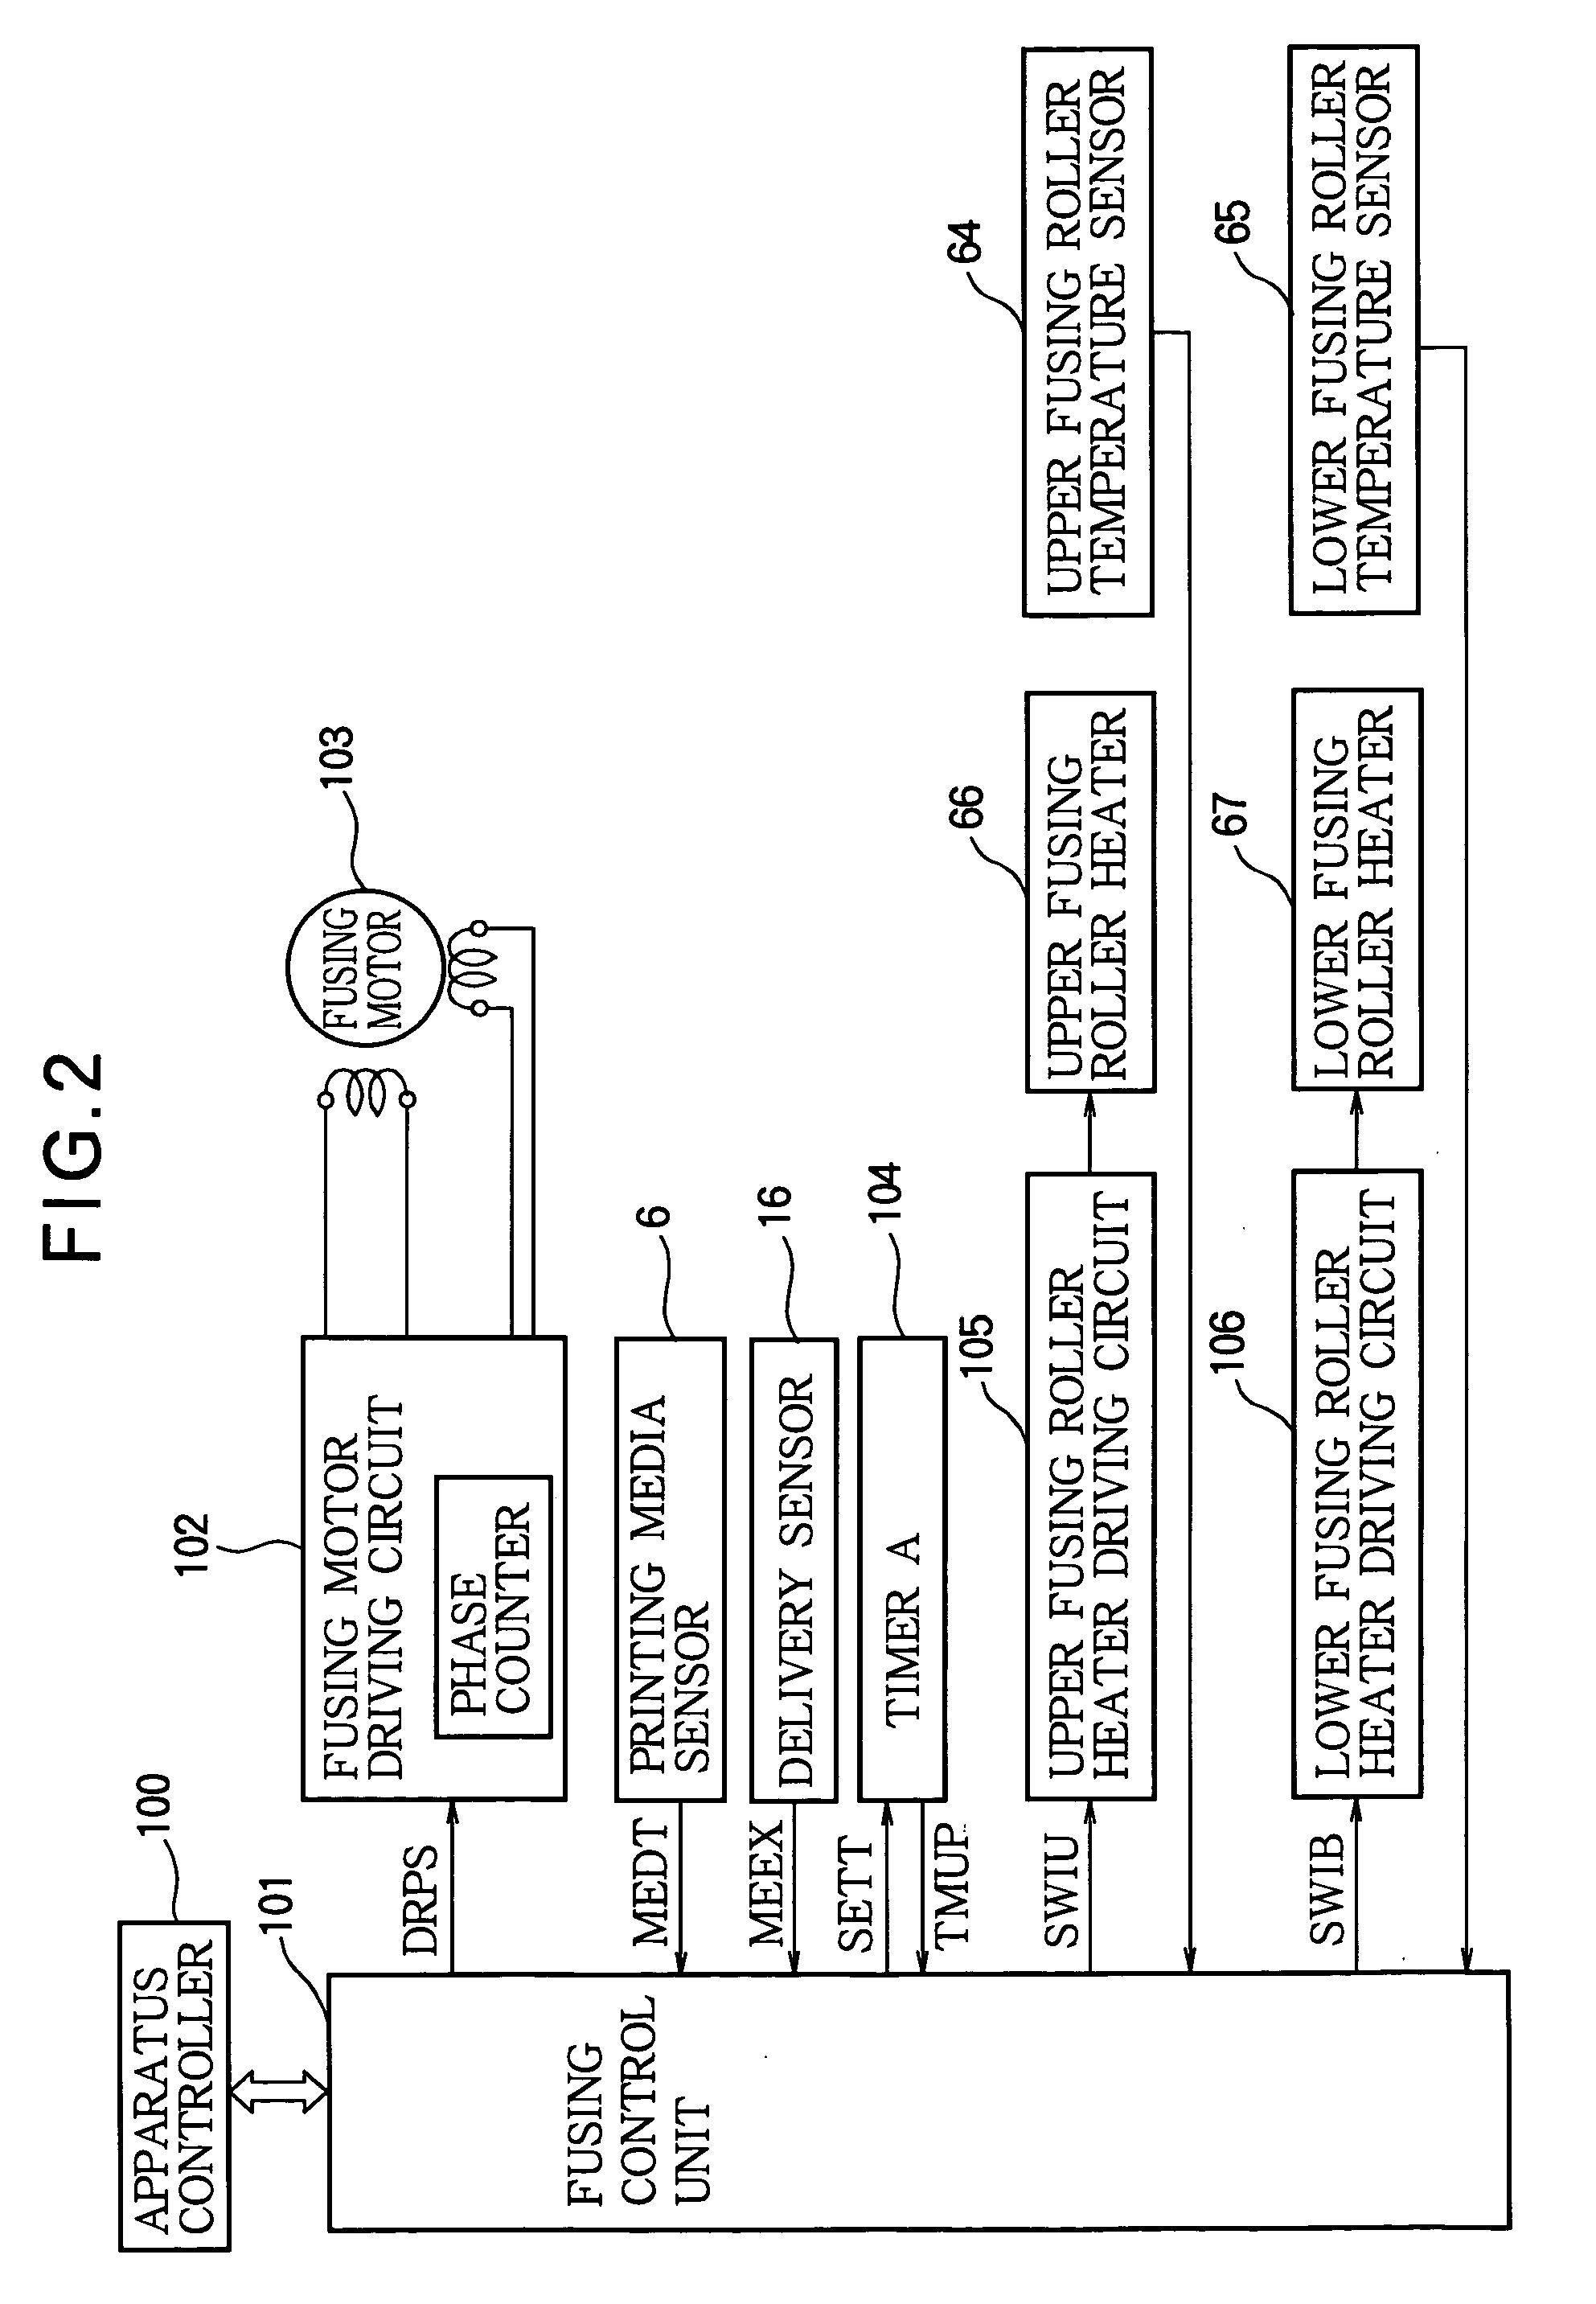 Image processing apparatus with preheating control